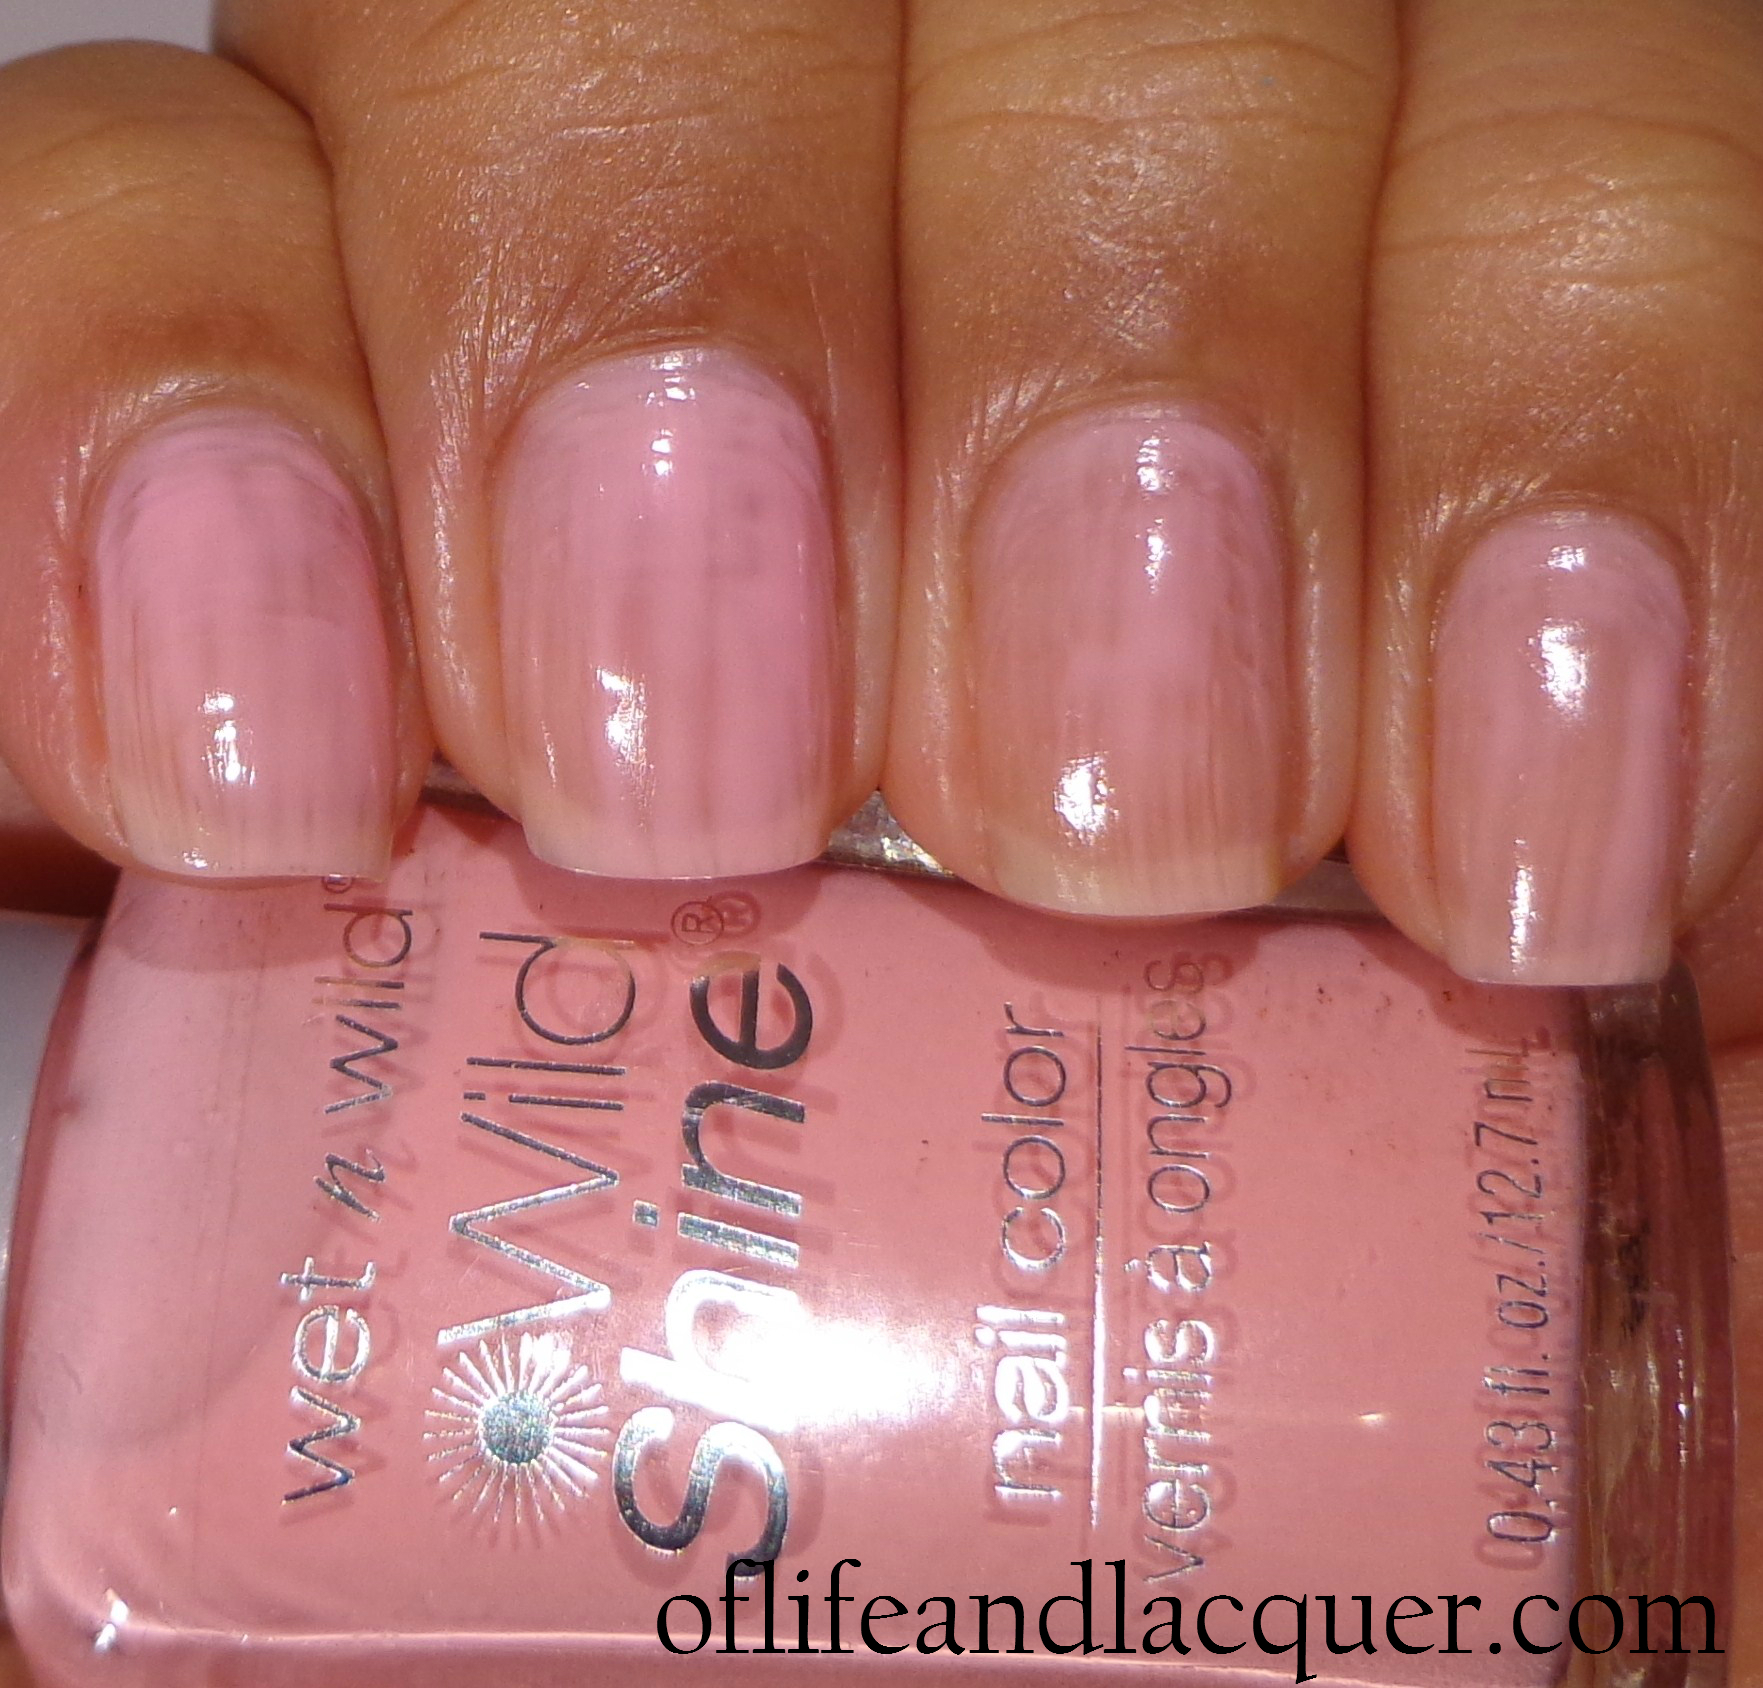 Wet N Wild Tickled Pink - Of Life and Lacquer